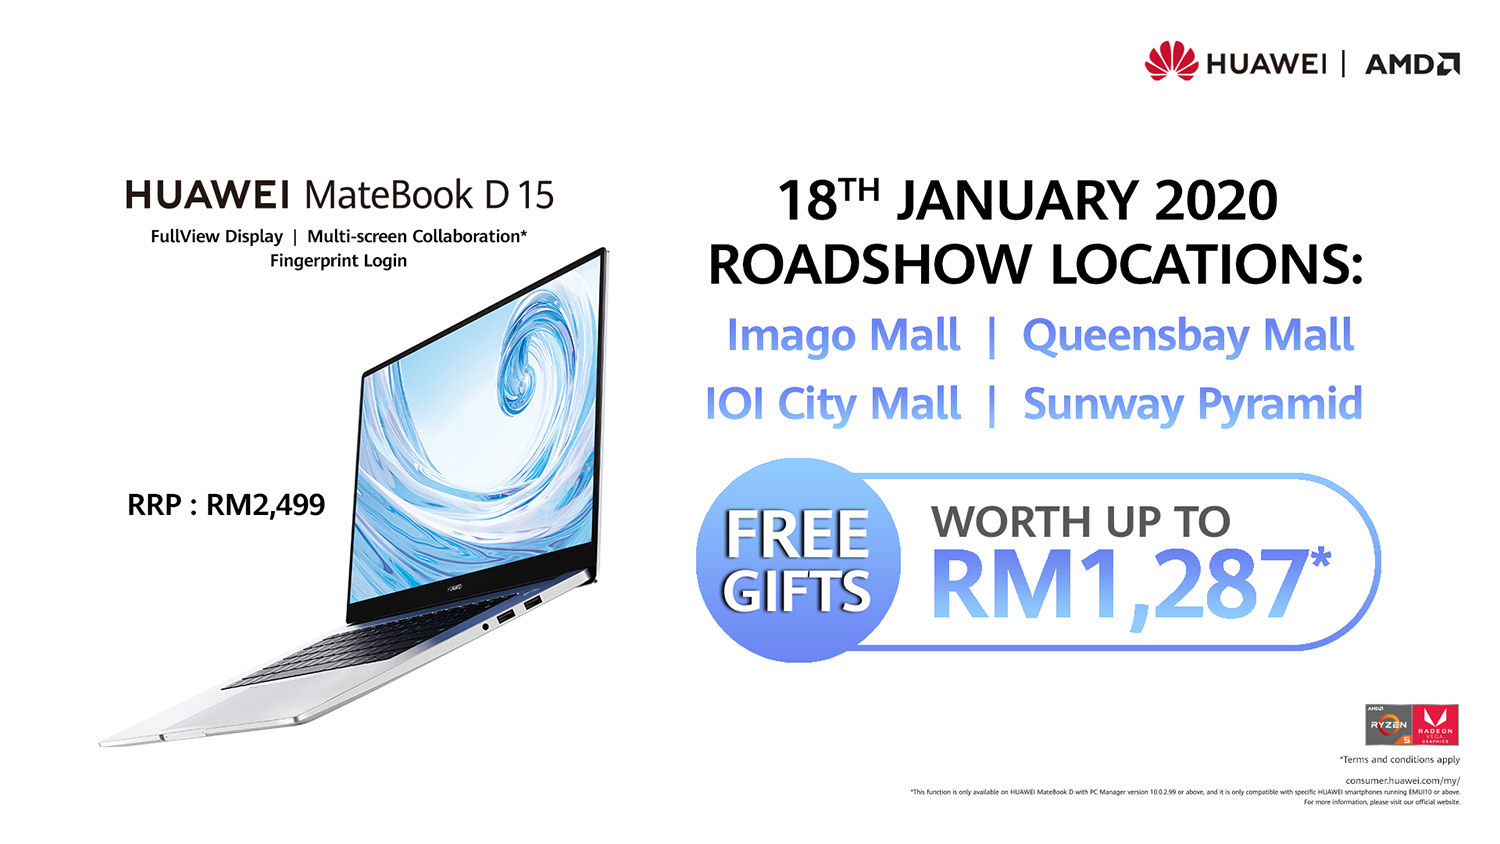 Get HUAWEI MateBook D 15 with Freebies at HUAWEI Roadshows on January 18